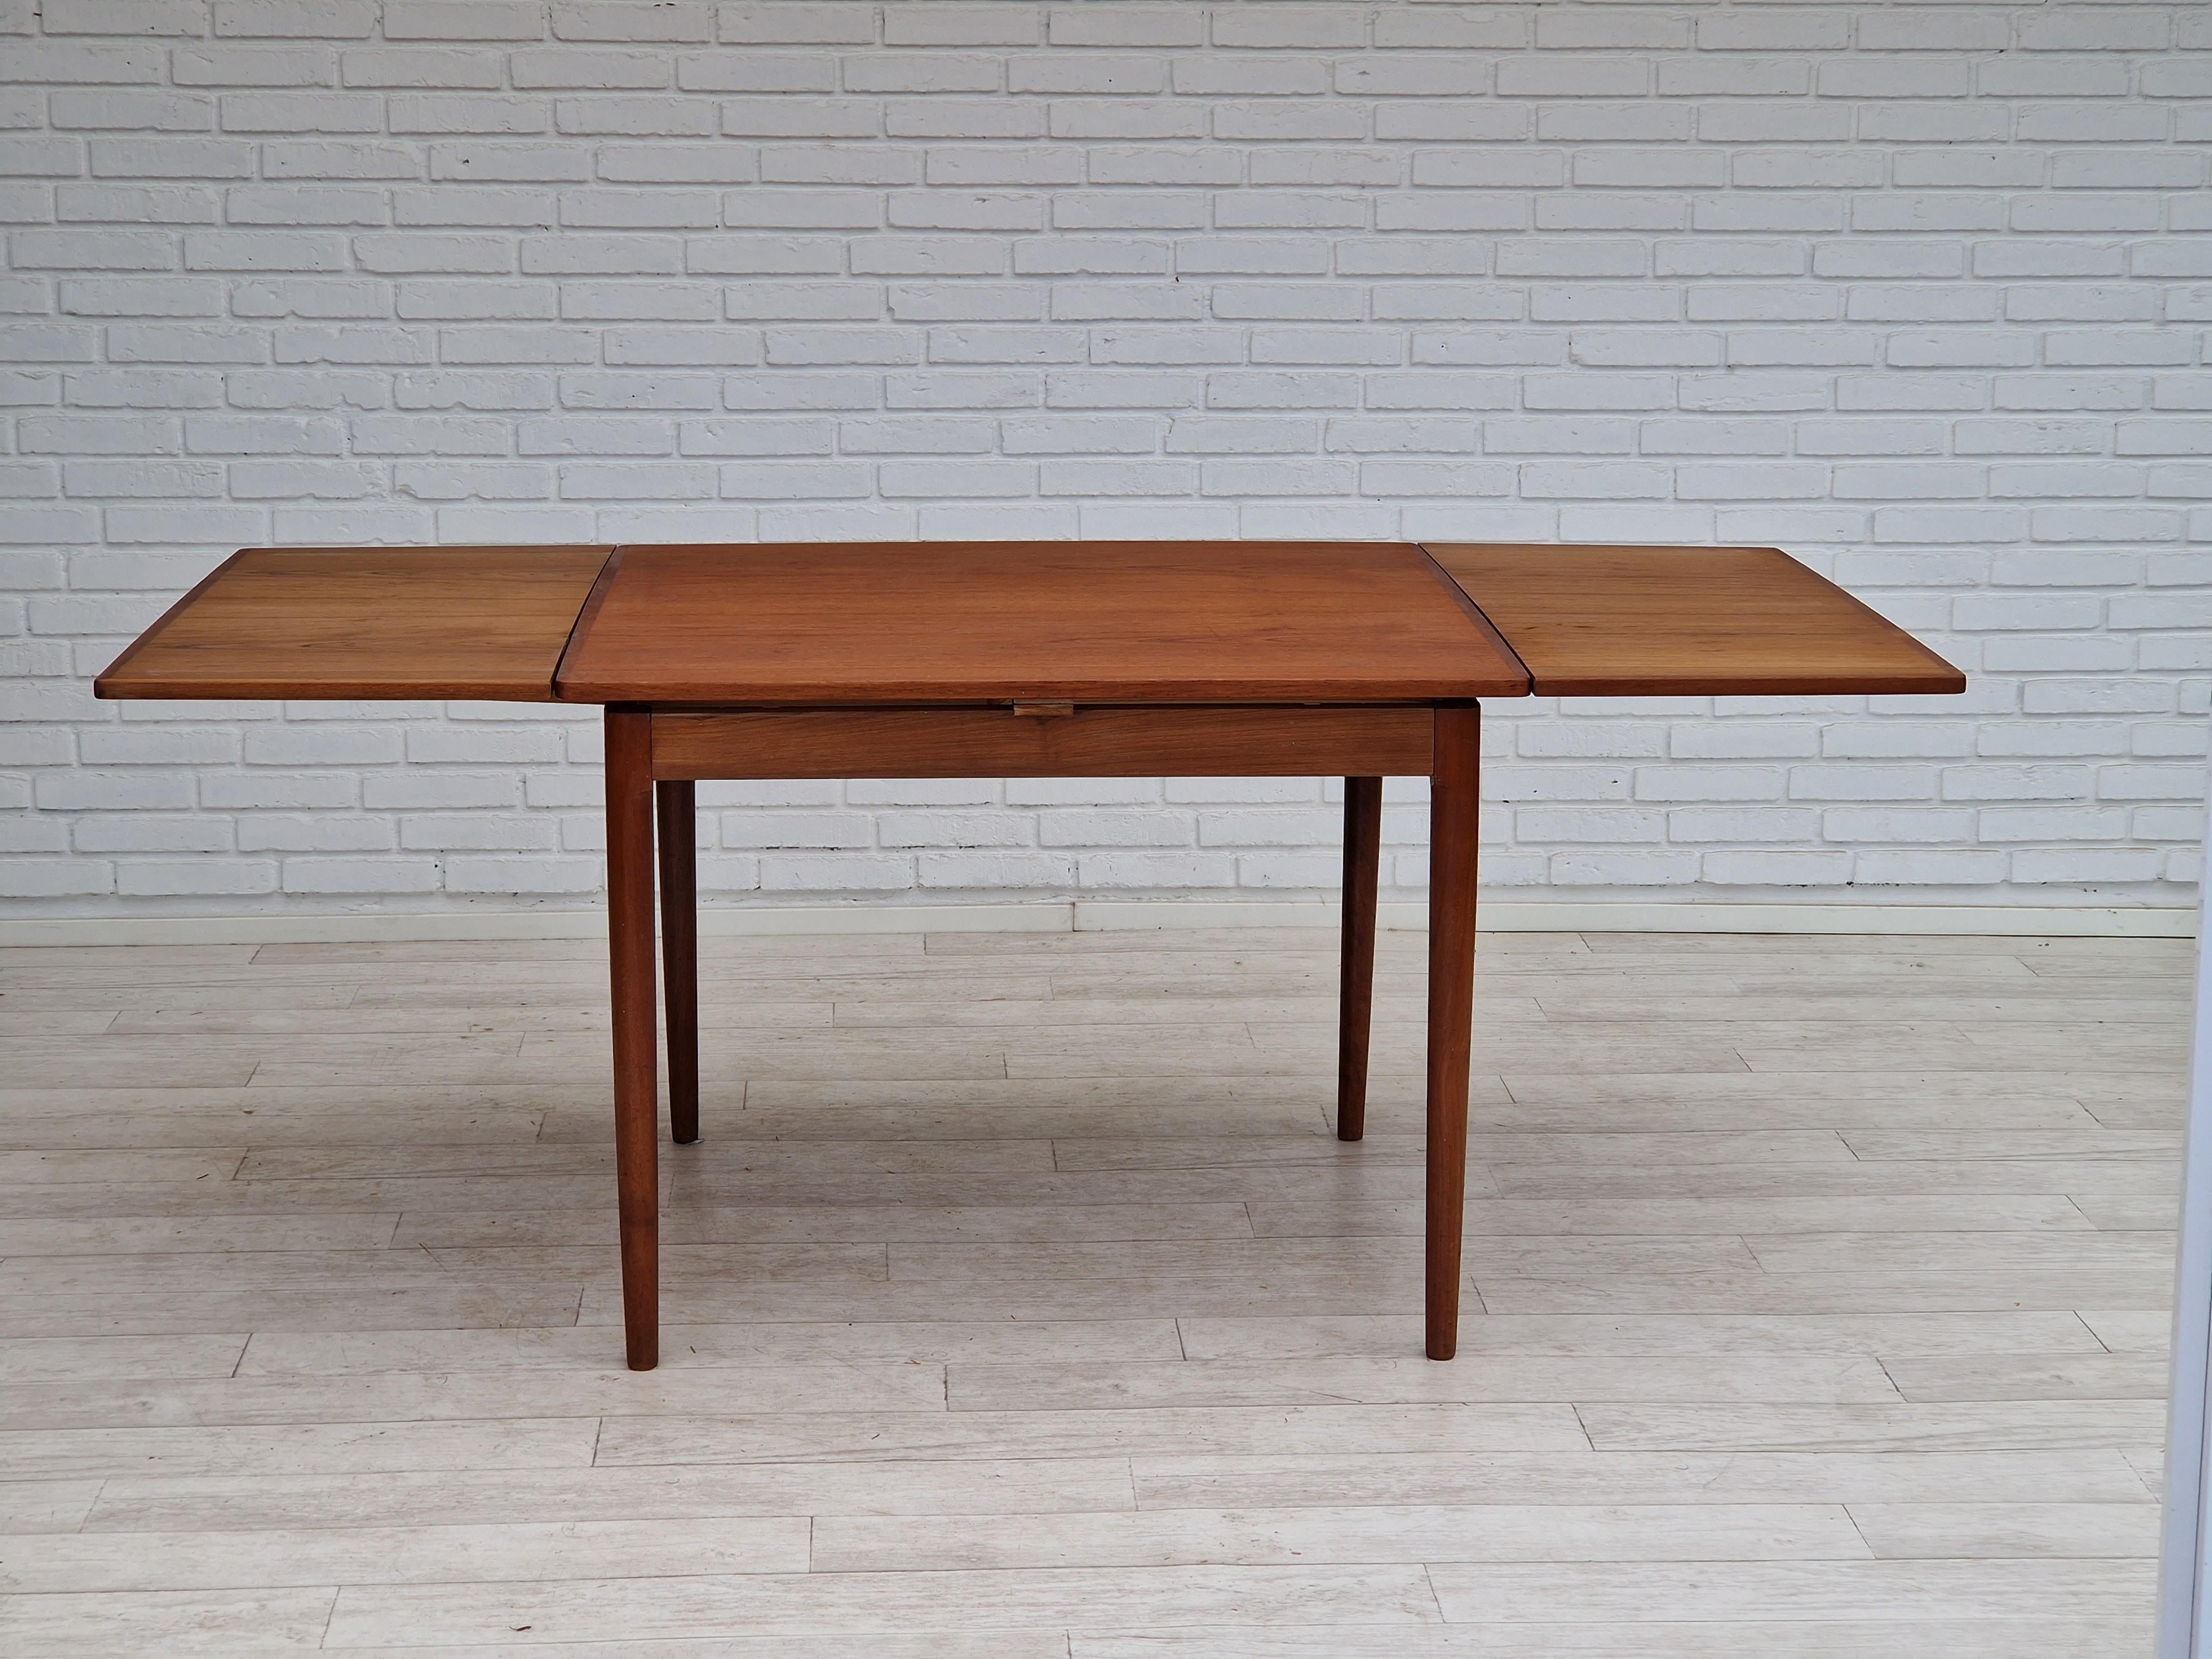 1960s, Danish design. Unfolded dining table in teak wood. Original very good condition: no smells and no stains.